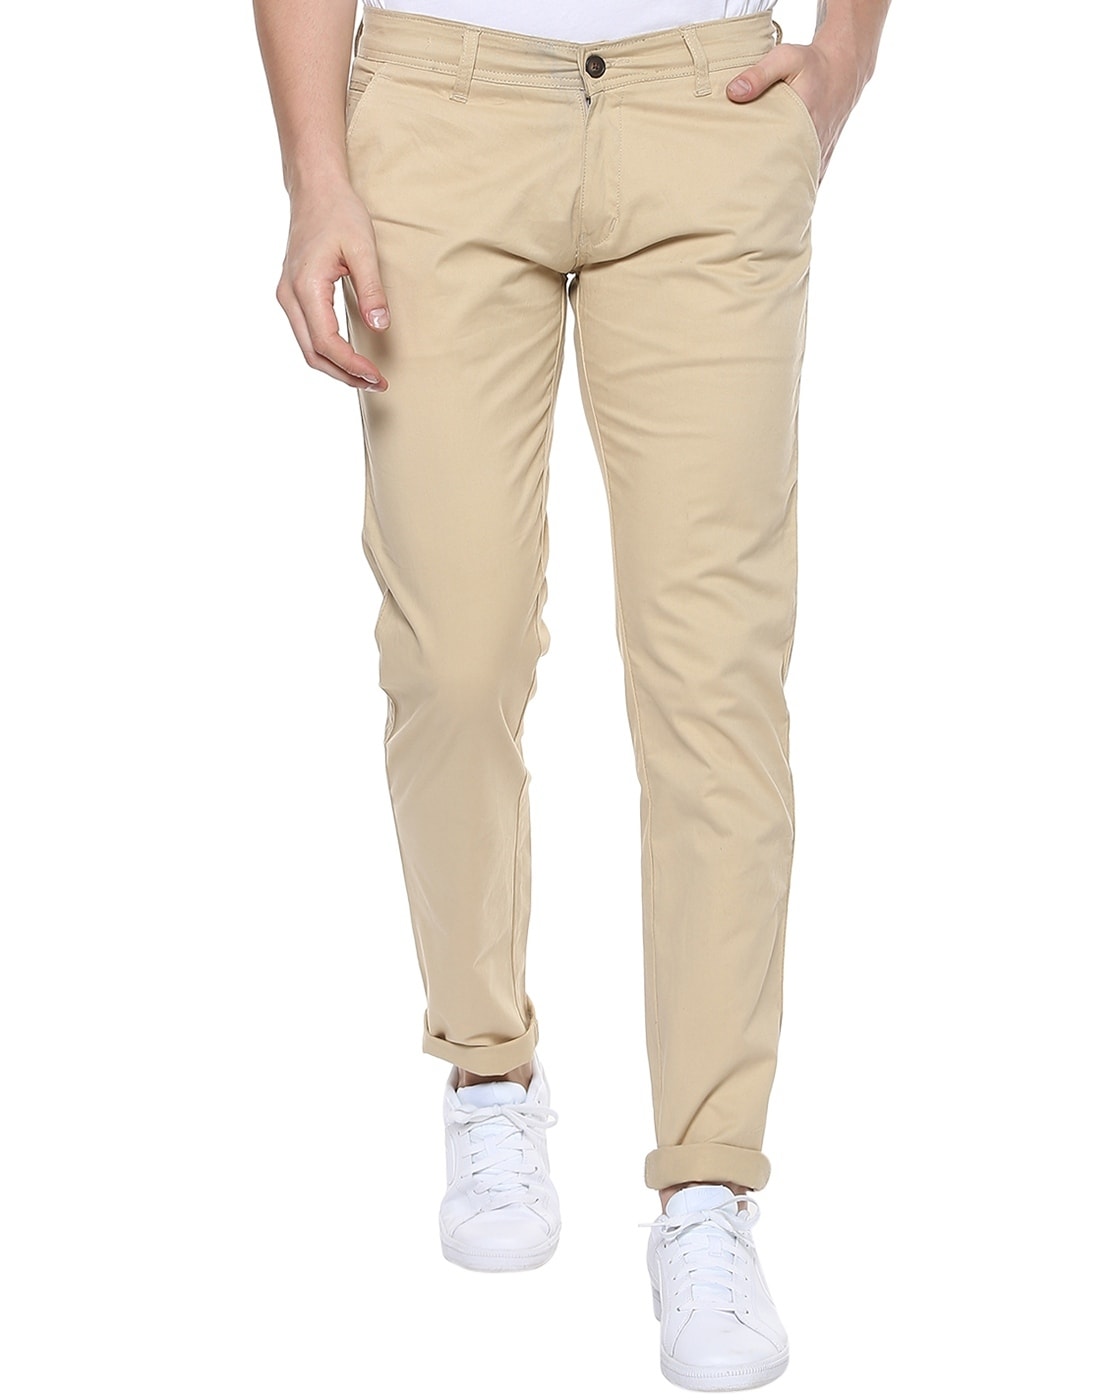 Buy Cream Narrow Pant Cotton Narrow Pant for Best Price Reviews Free  Shipping